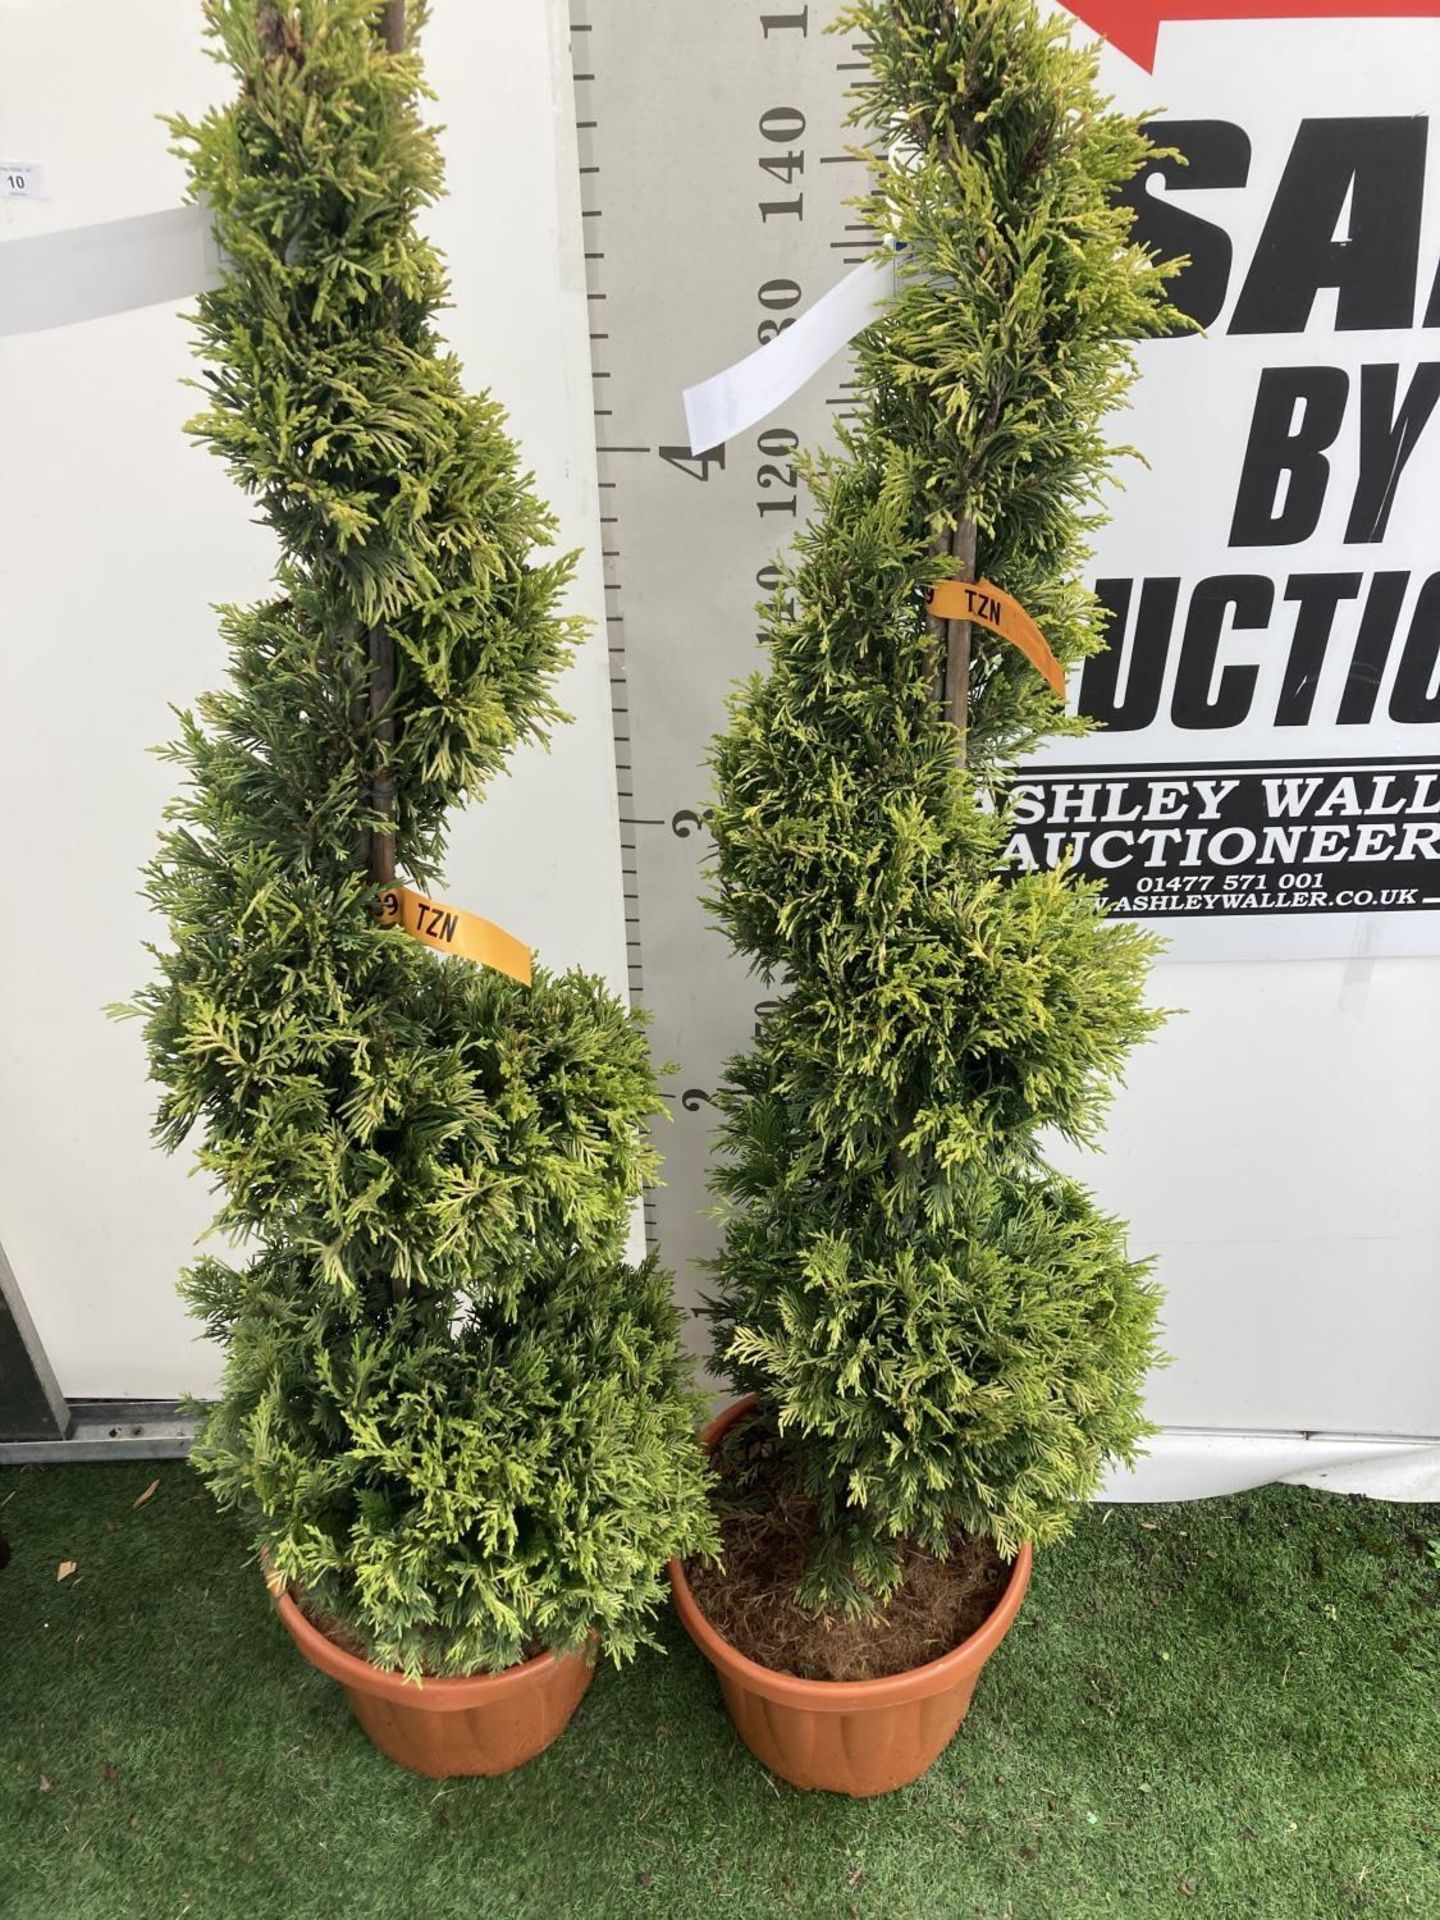 TWO SPIRAL CUPRESSOCYPARIS LEYLANDII 'GOLD RIDER' OVER 150CM IN HEIGHT IN 15LTR POTS TO BE SOLD - Image 3 of 4